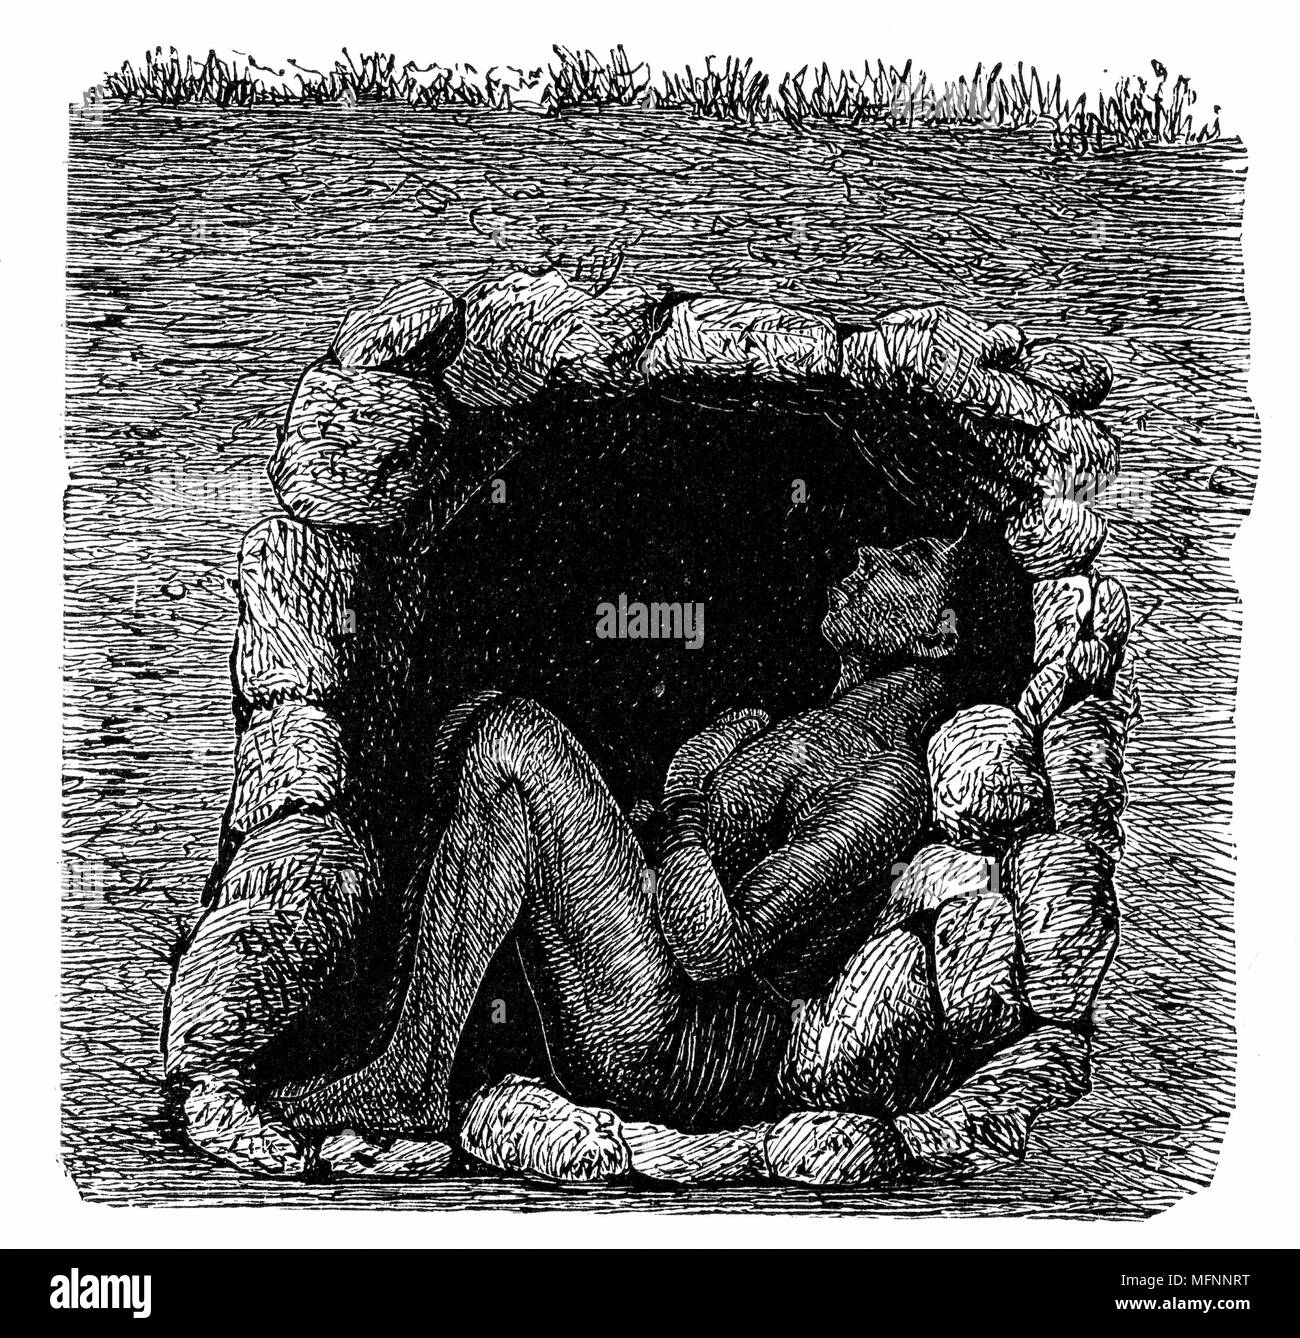 Burial: Grave of Zulu chief: body in sitting position in stone-lined underground chamber. Wood engraving from F Ratzel 'History of Mankind' Leipzig 1888. Wood engraving. Stock Photo